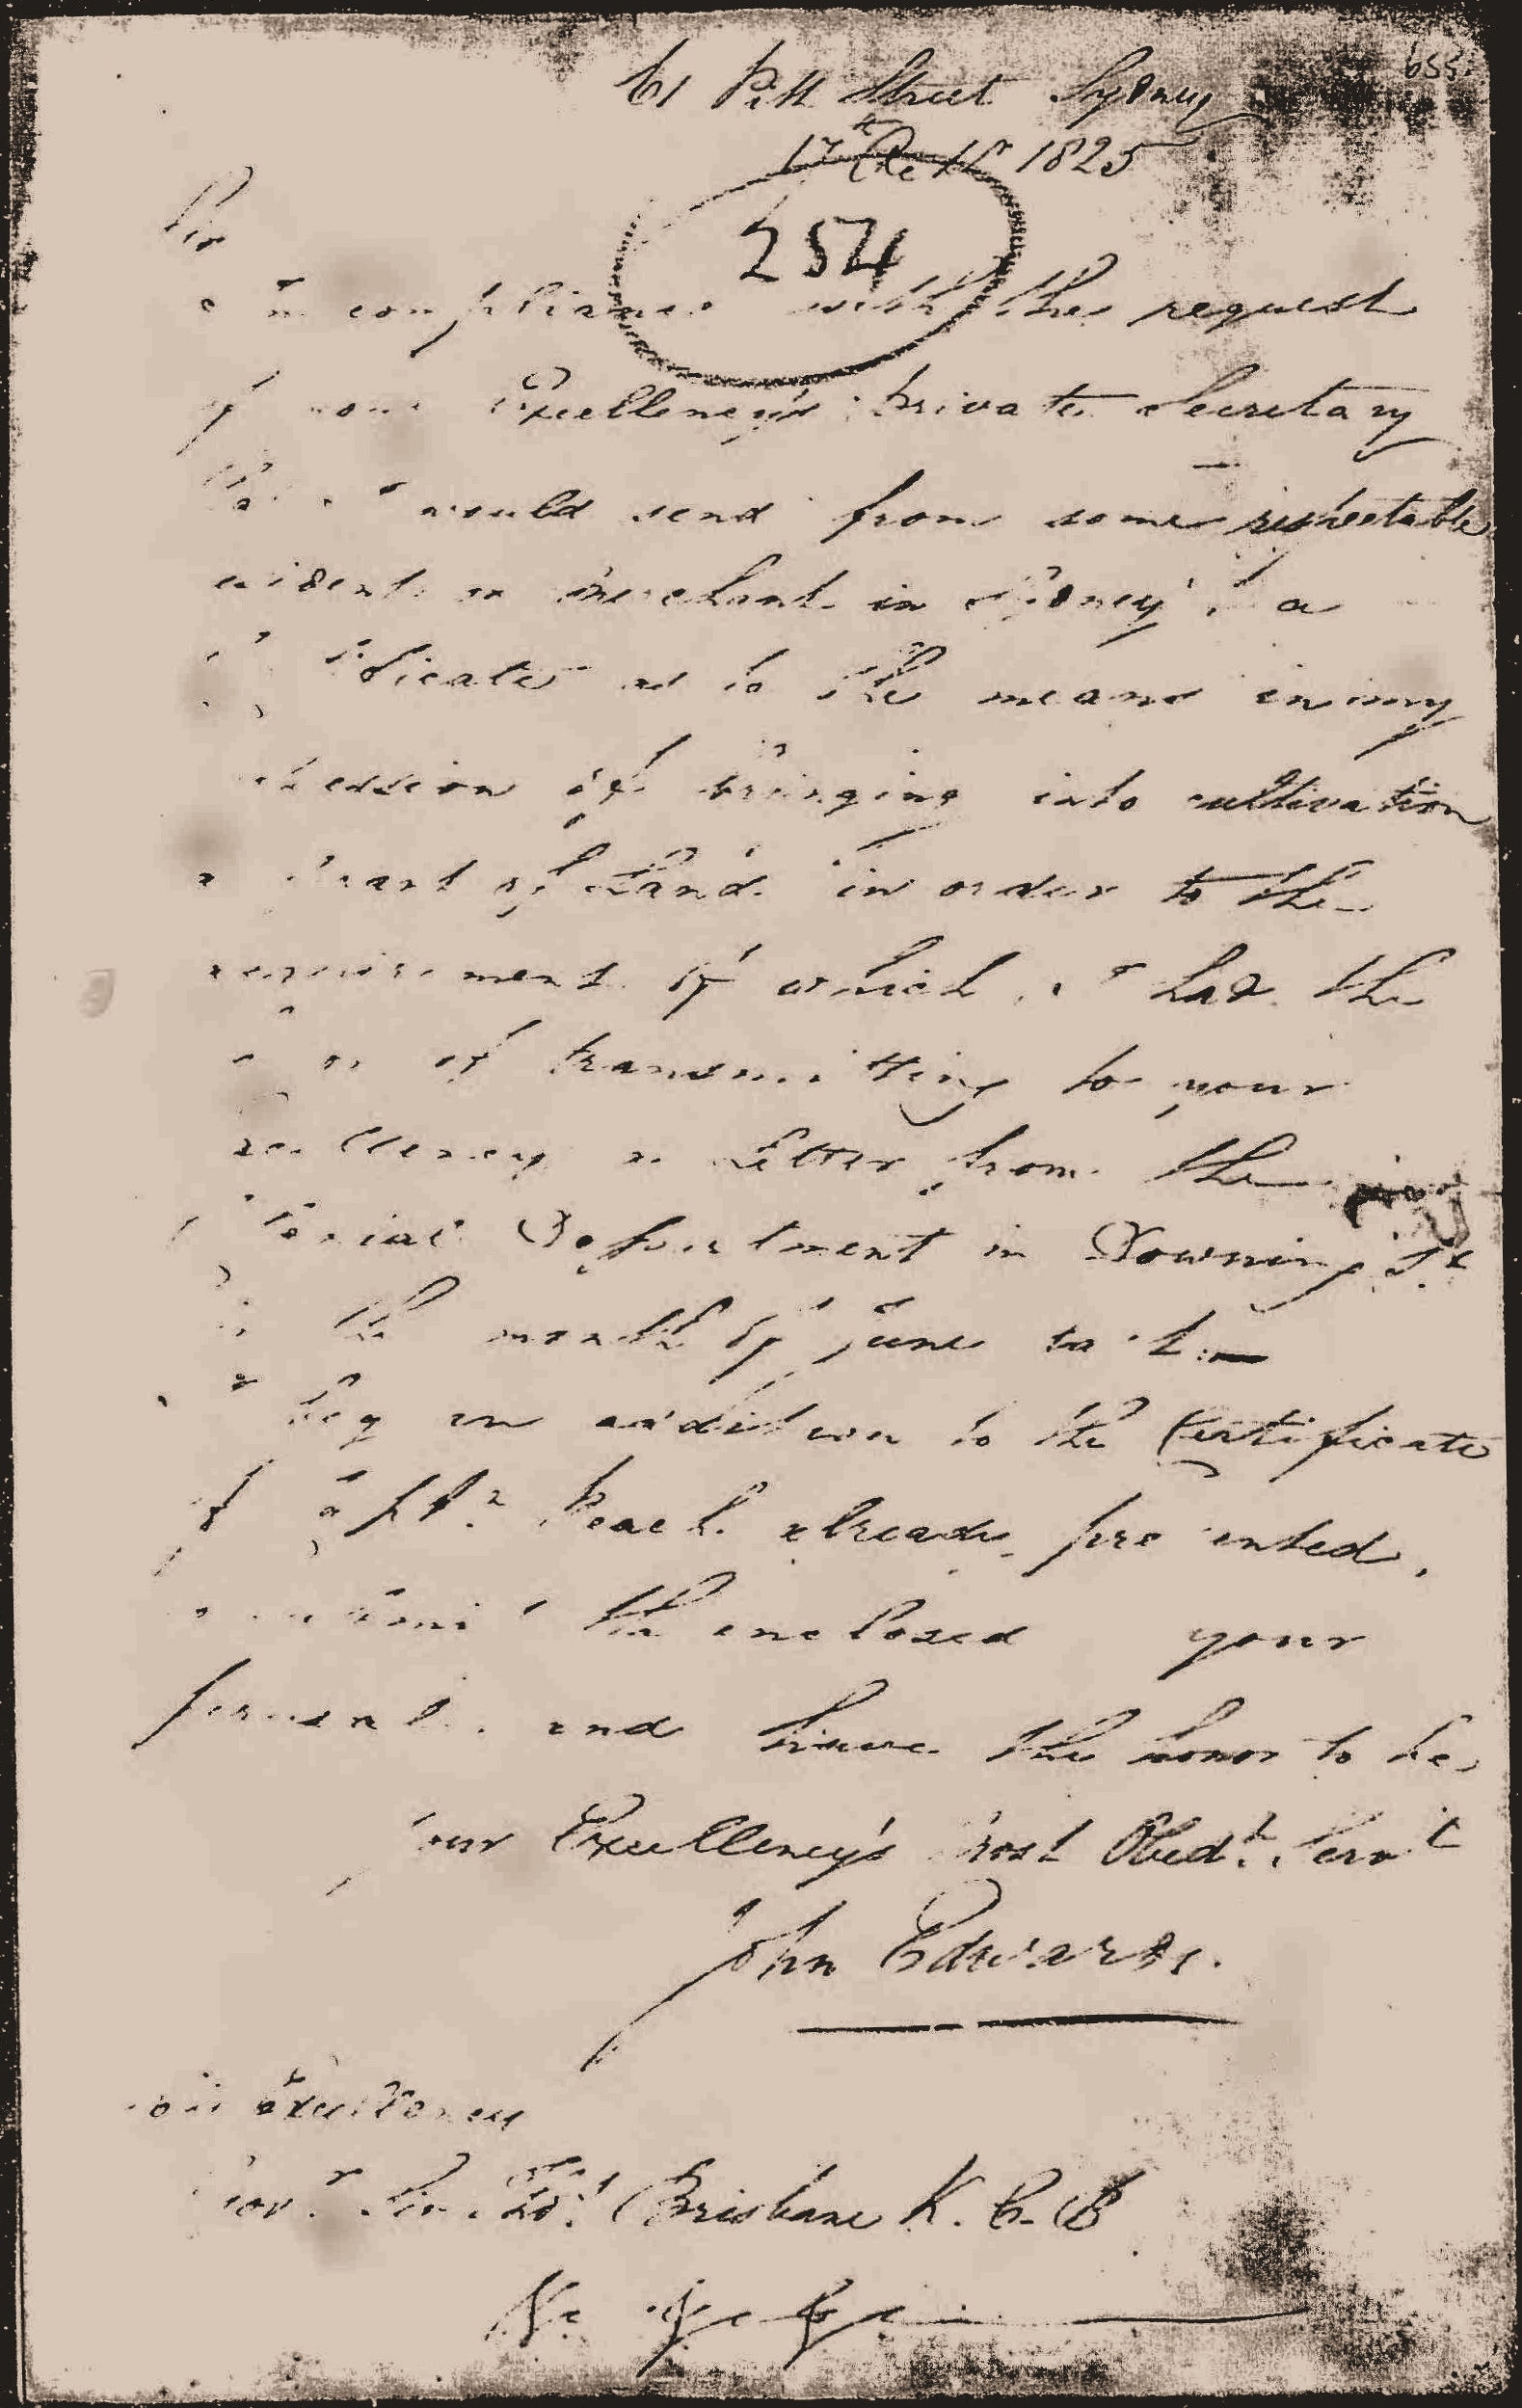 Letter from John Edwards, 17th October 1825, to Thomas Brisbane